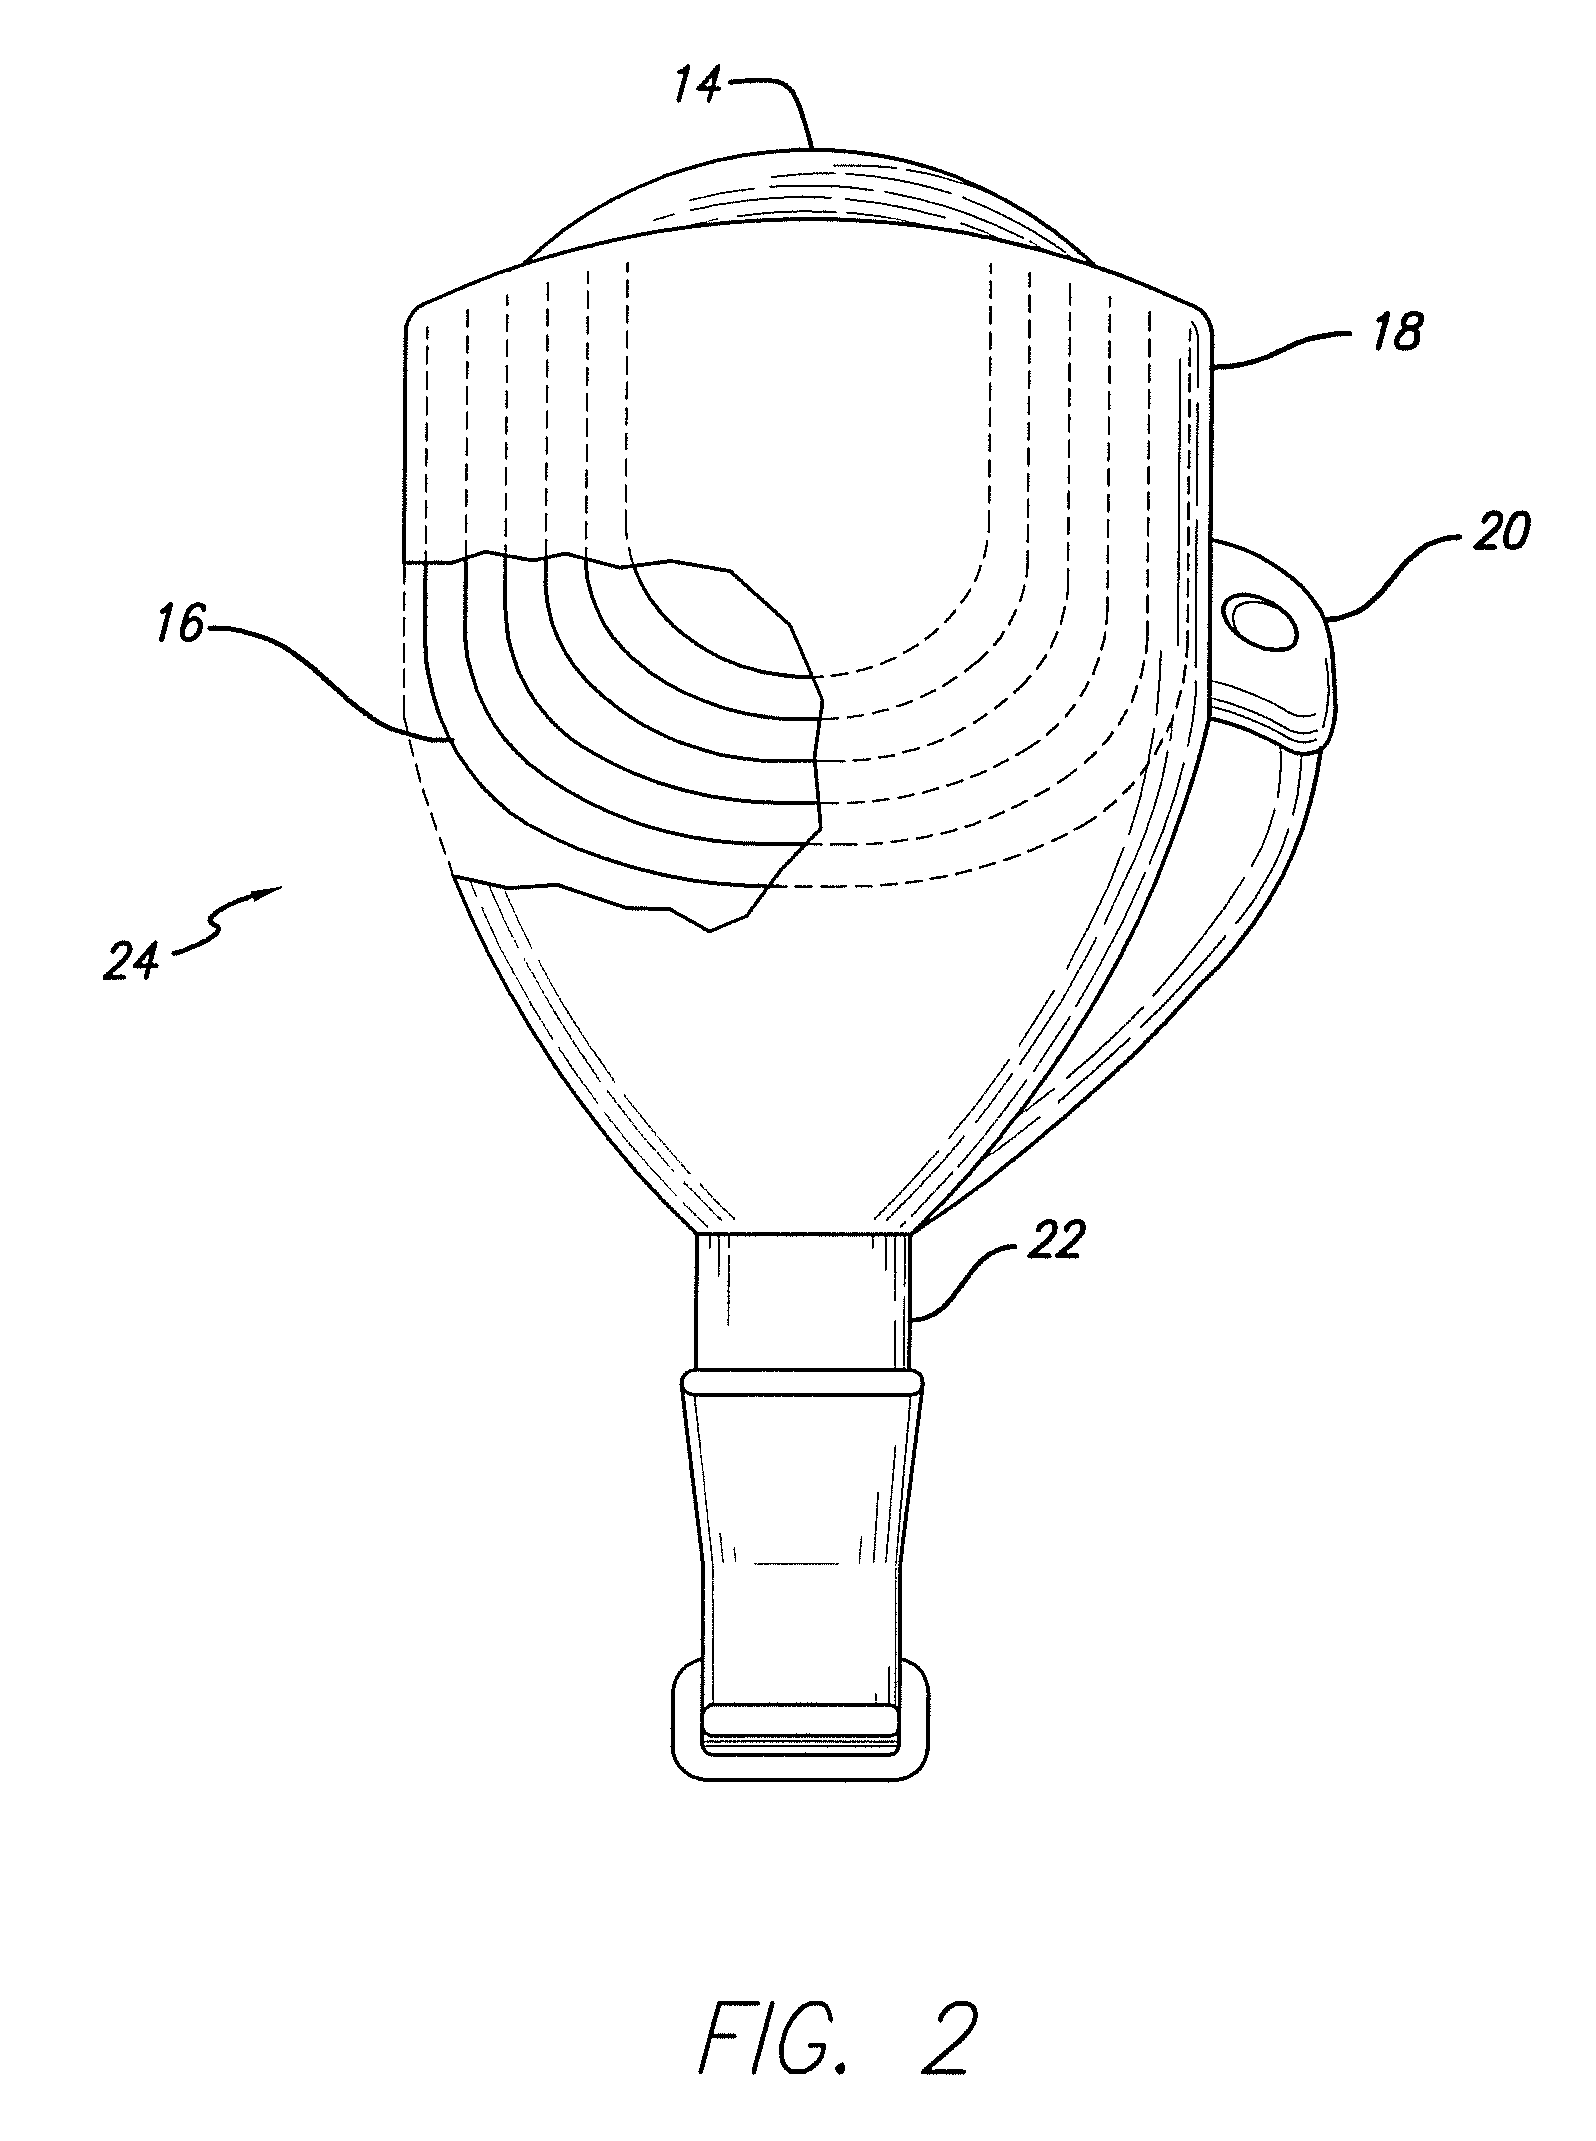 Flexible circuit electrode array with at least one tack opening